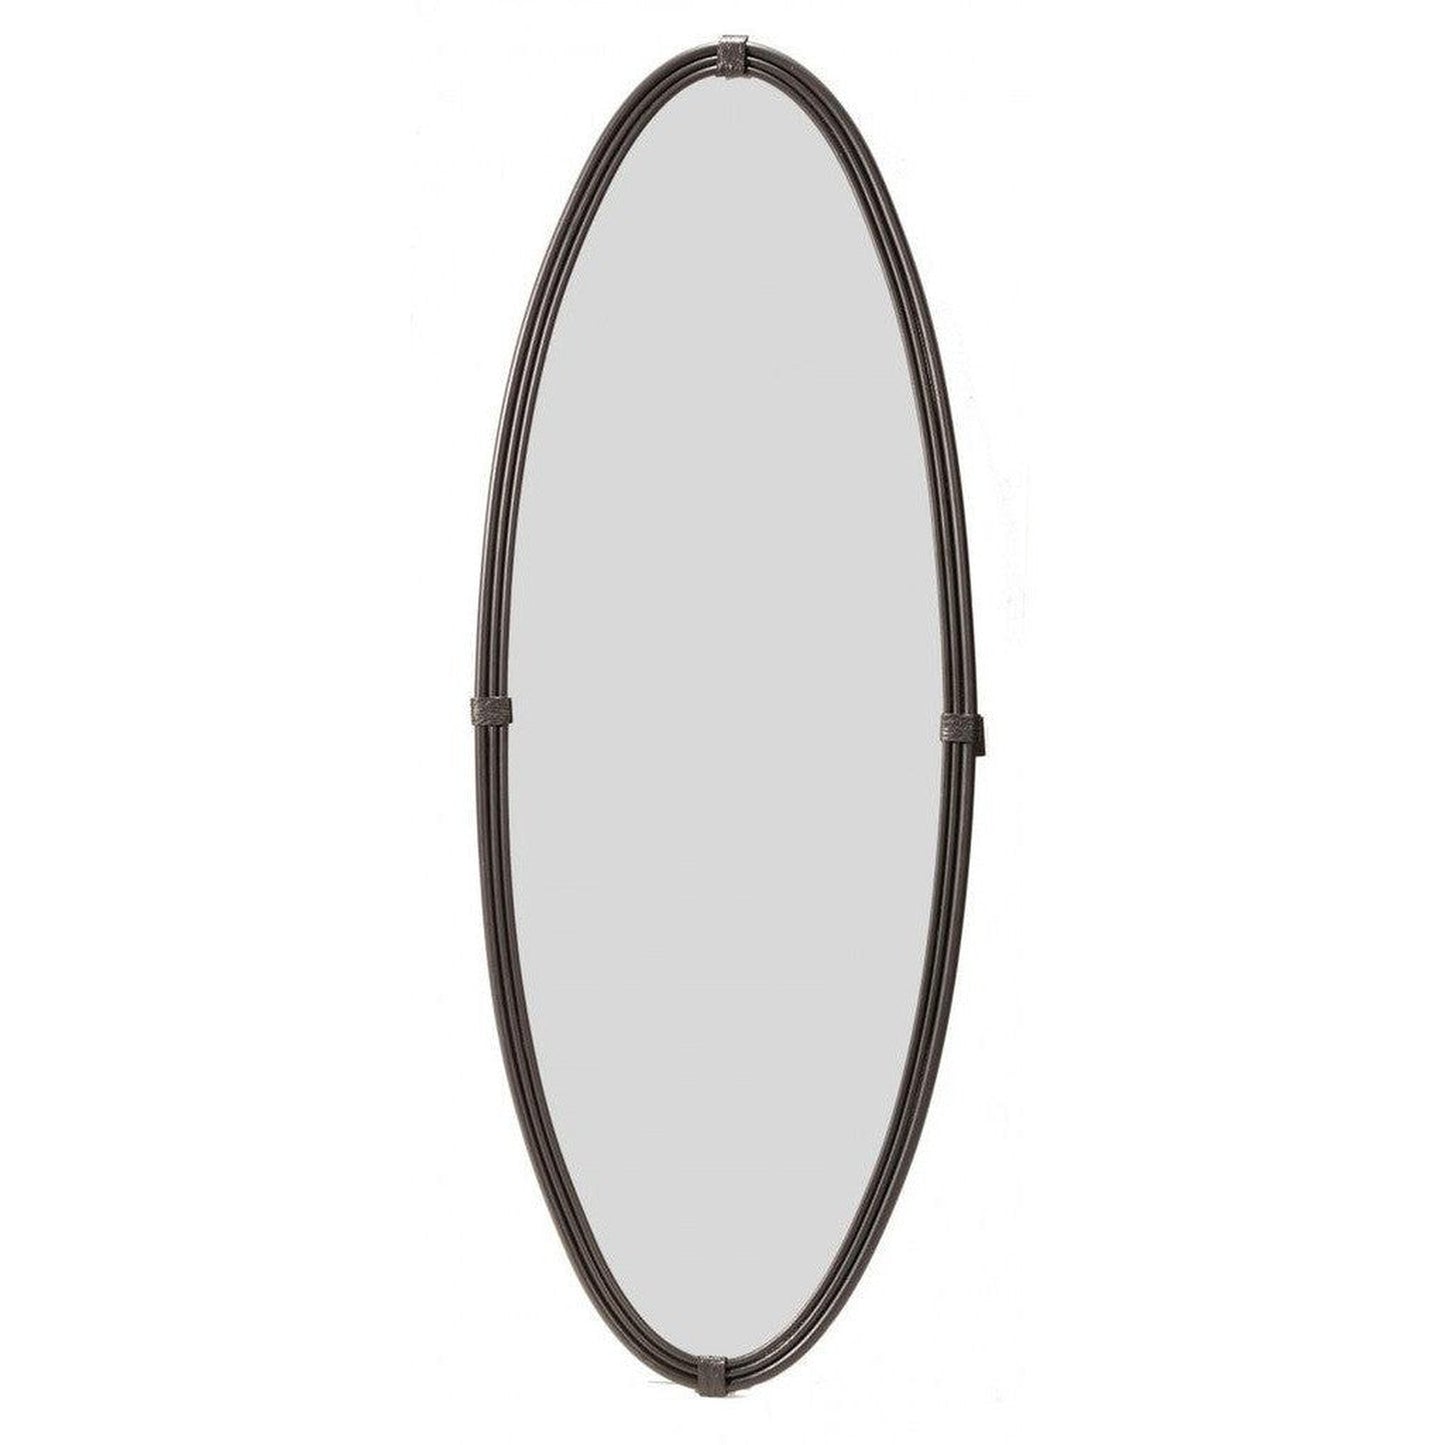 Stone County Ironworks Queensbury 19" Large Woodland Brown Oval Iron Wall Mirror With Copper Iron Accent